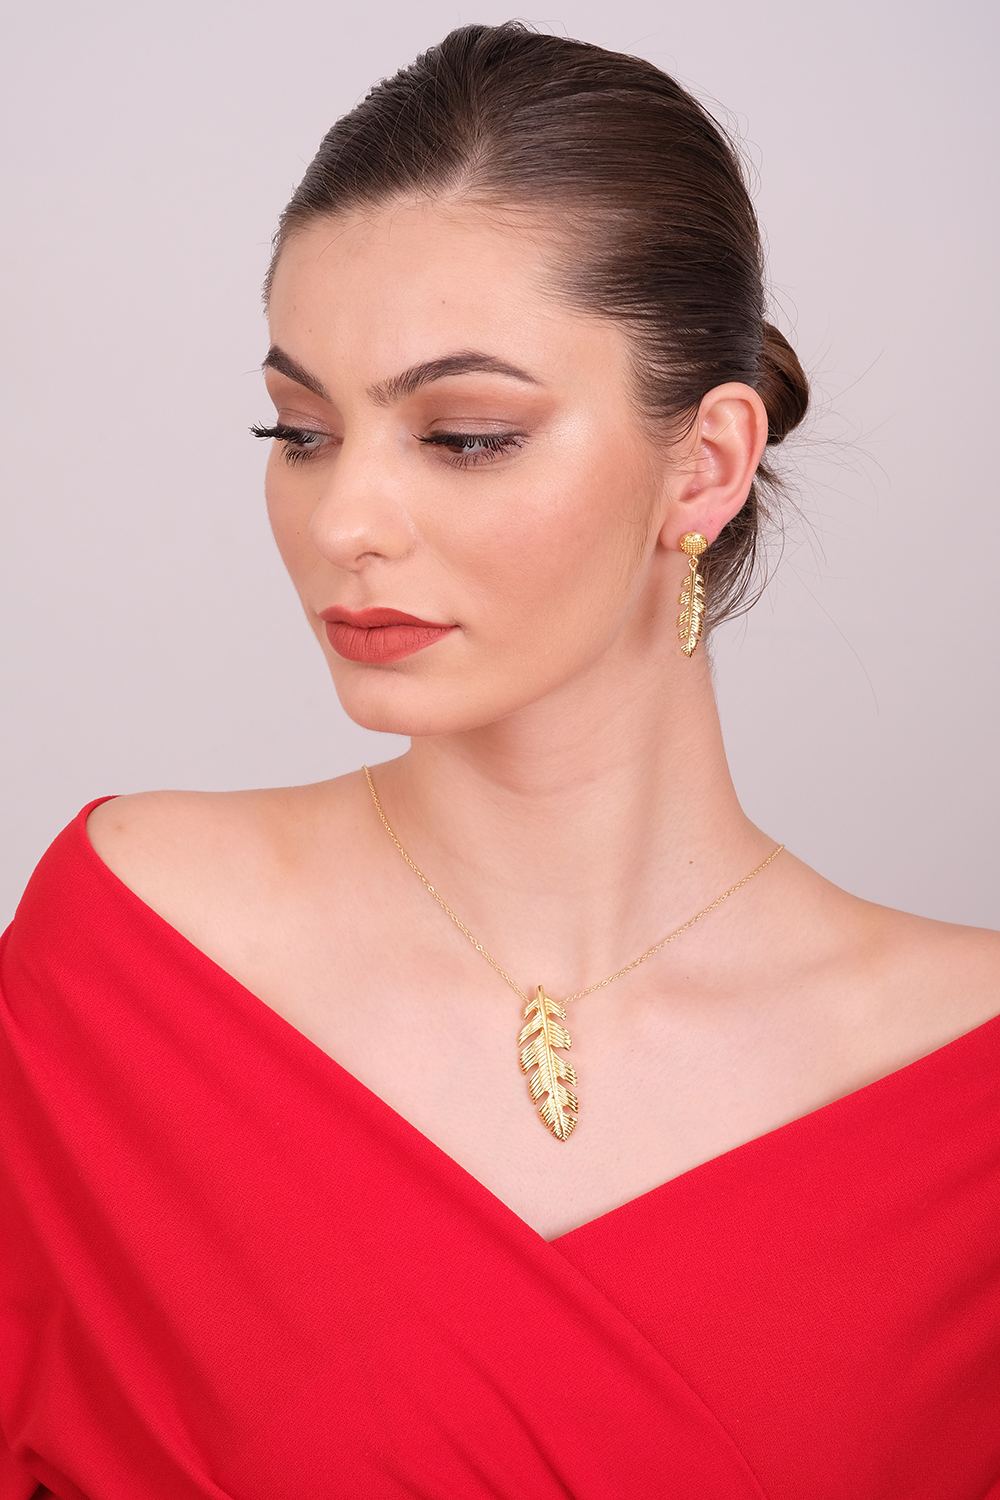 ROMANCE Necklace and Earrings Gold plated Jewelry Set